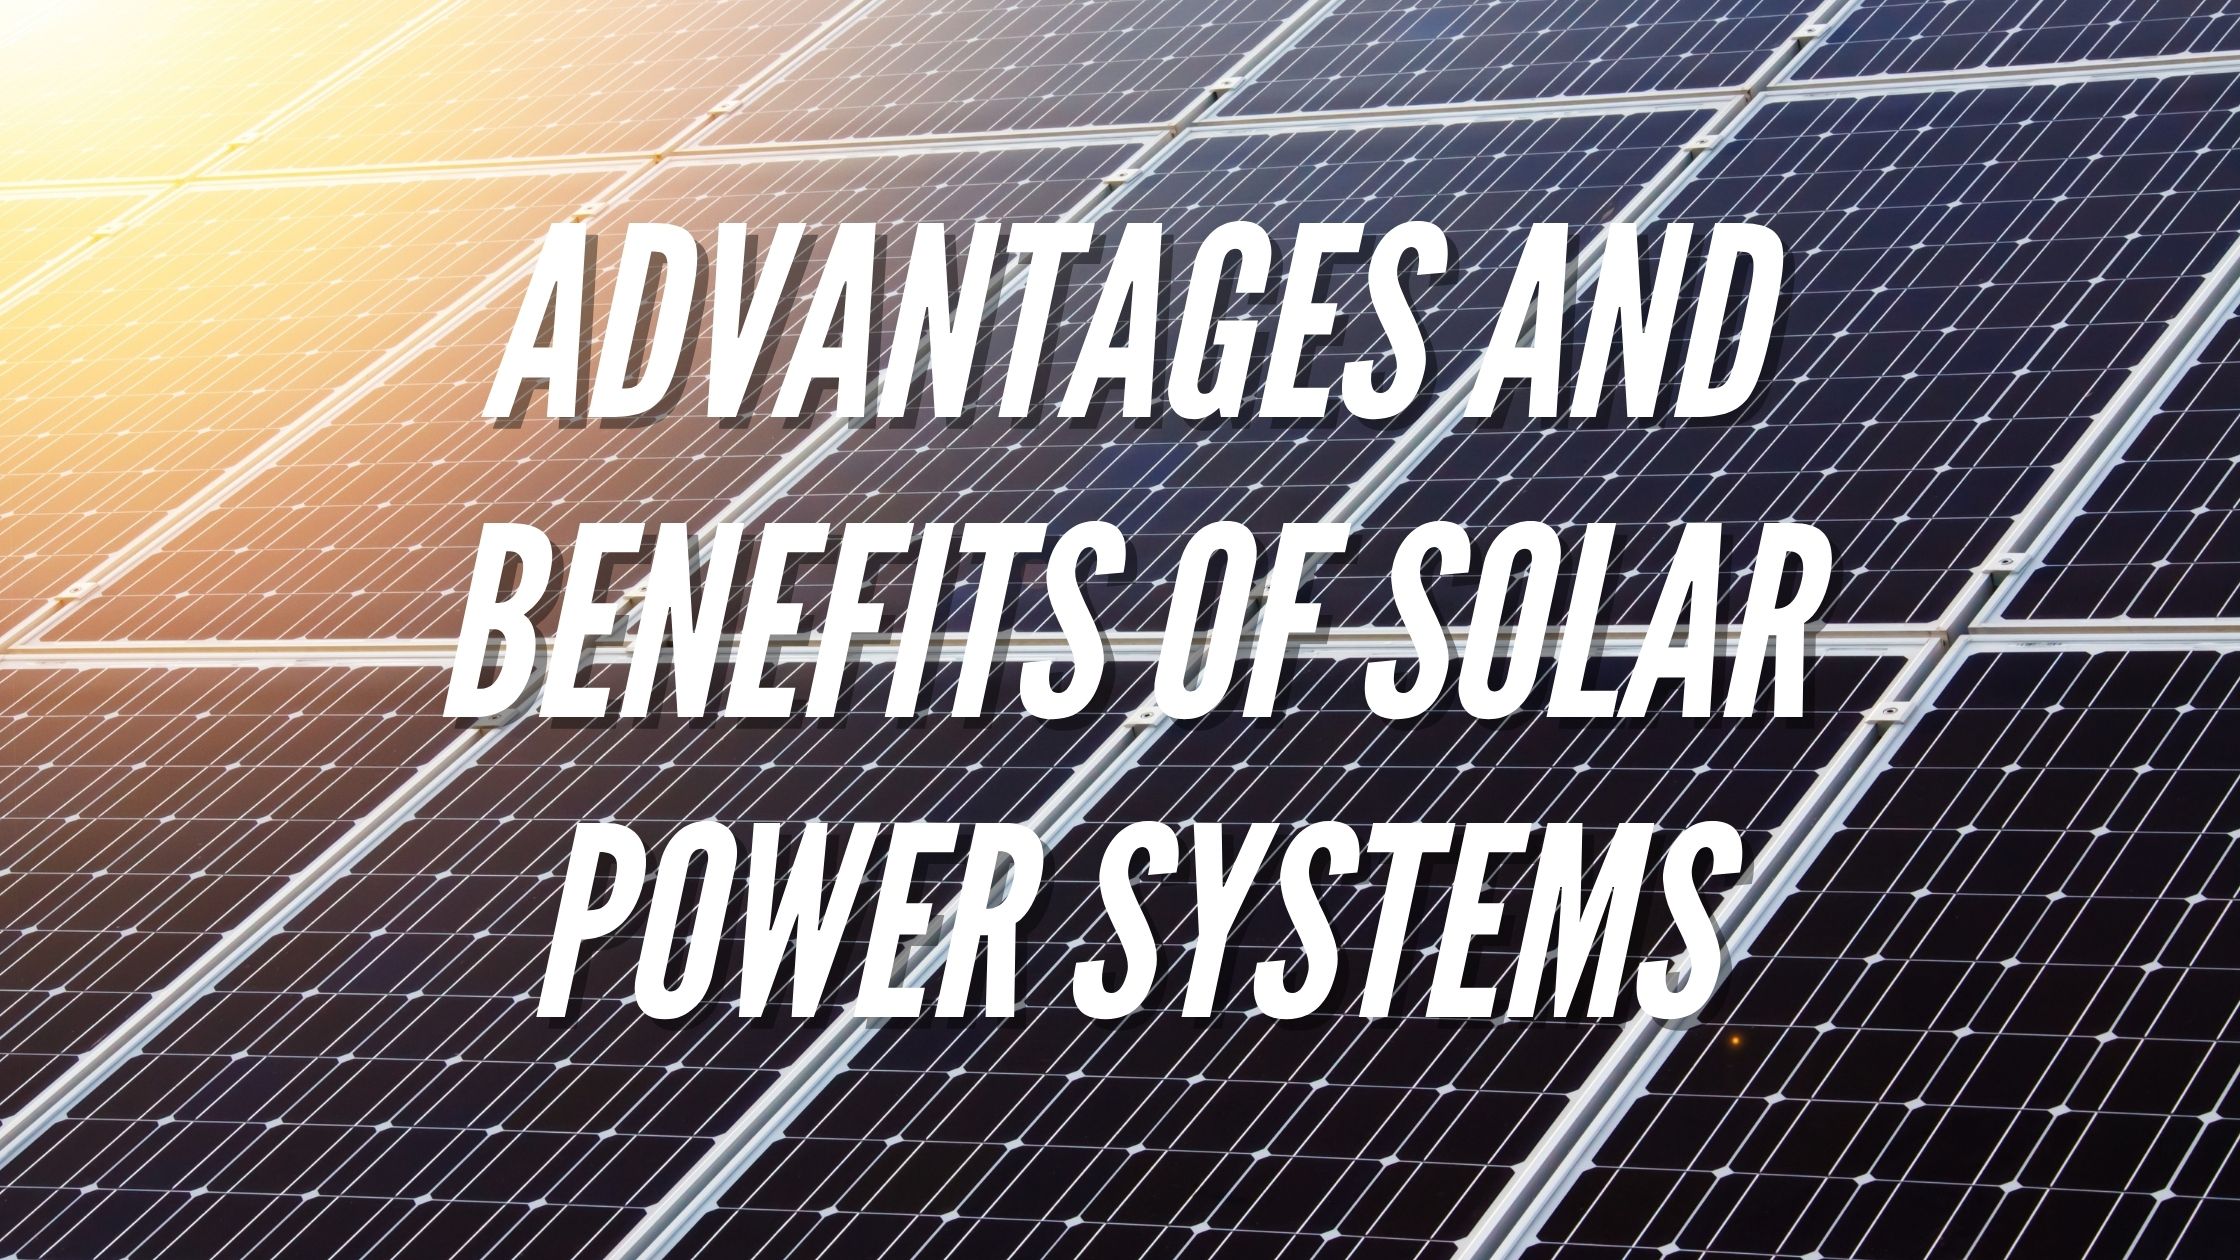 Advantages and Benefits of Solar Power Systems